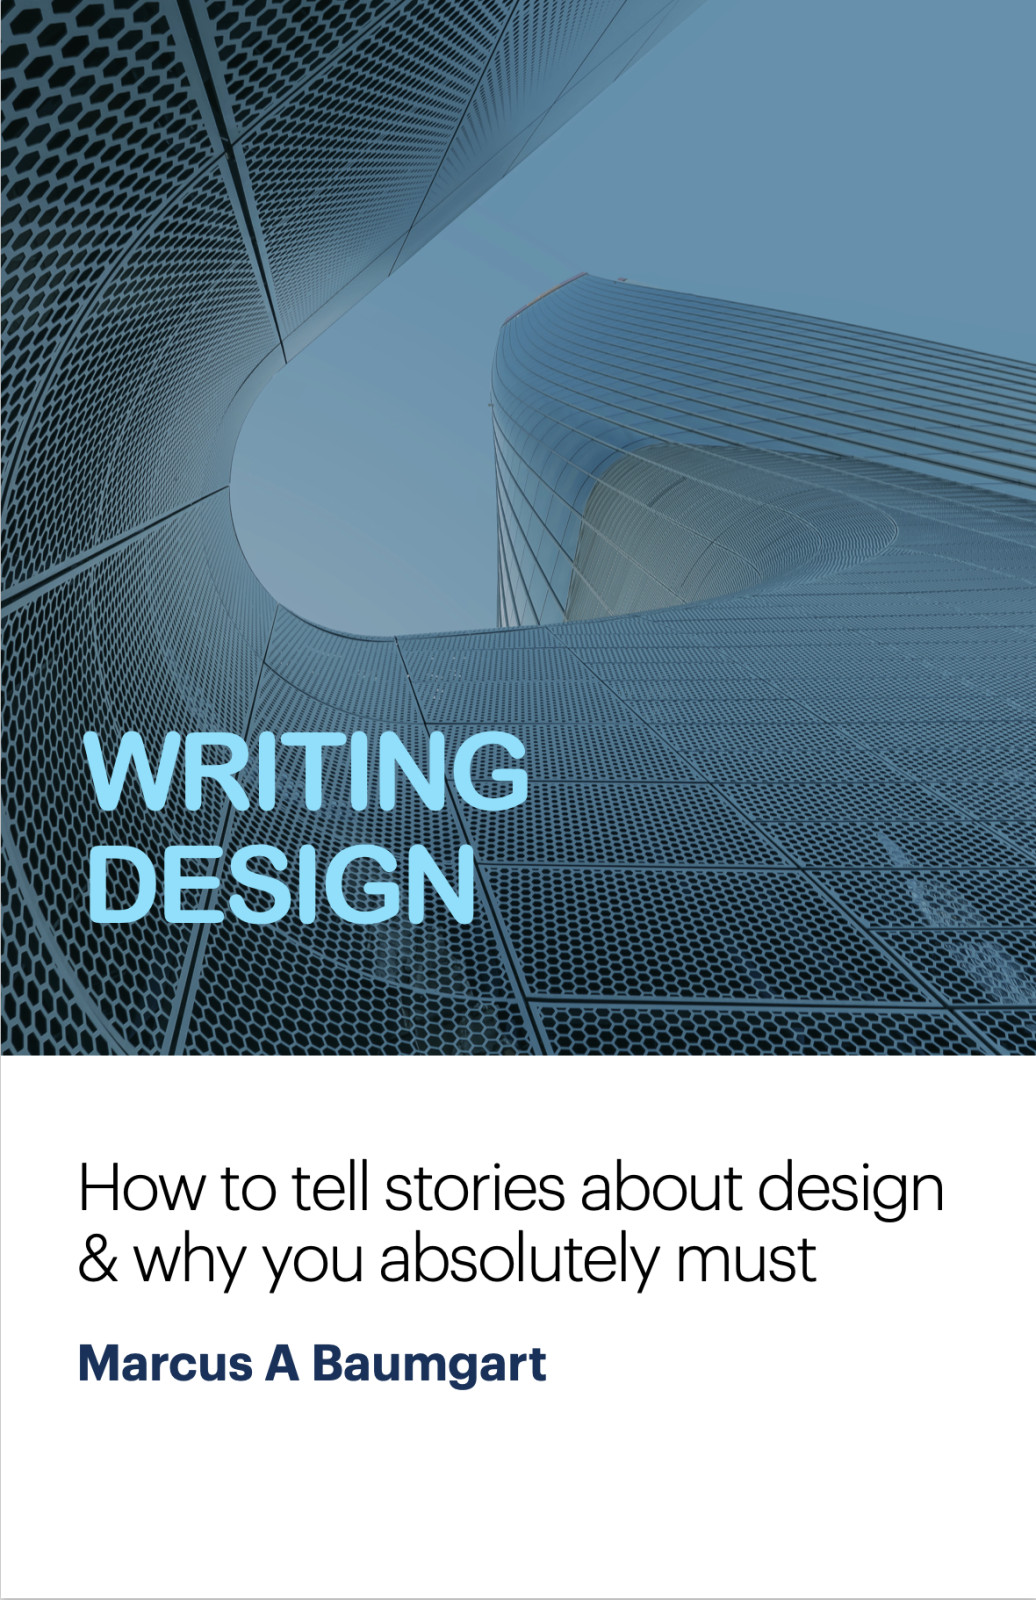 Writing Design: the New Book Title